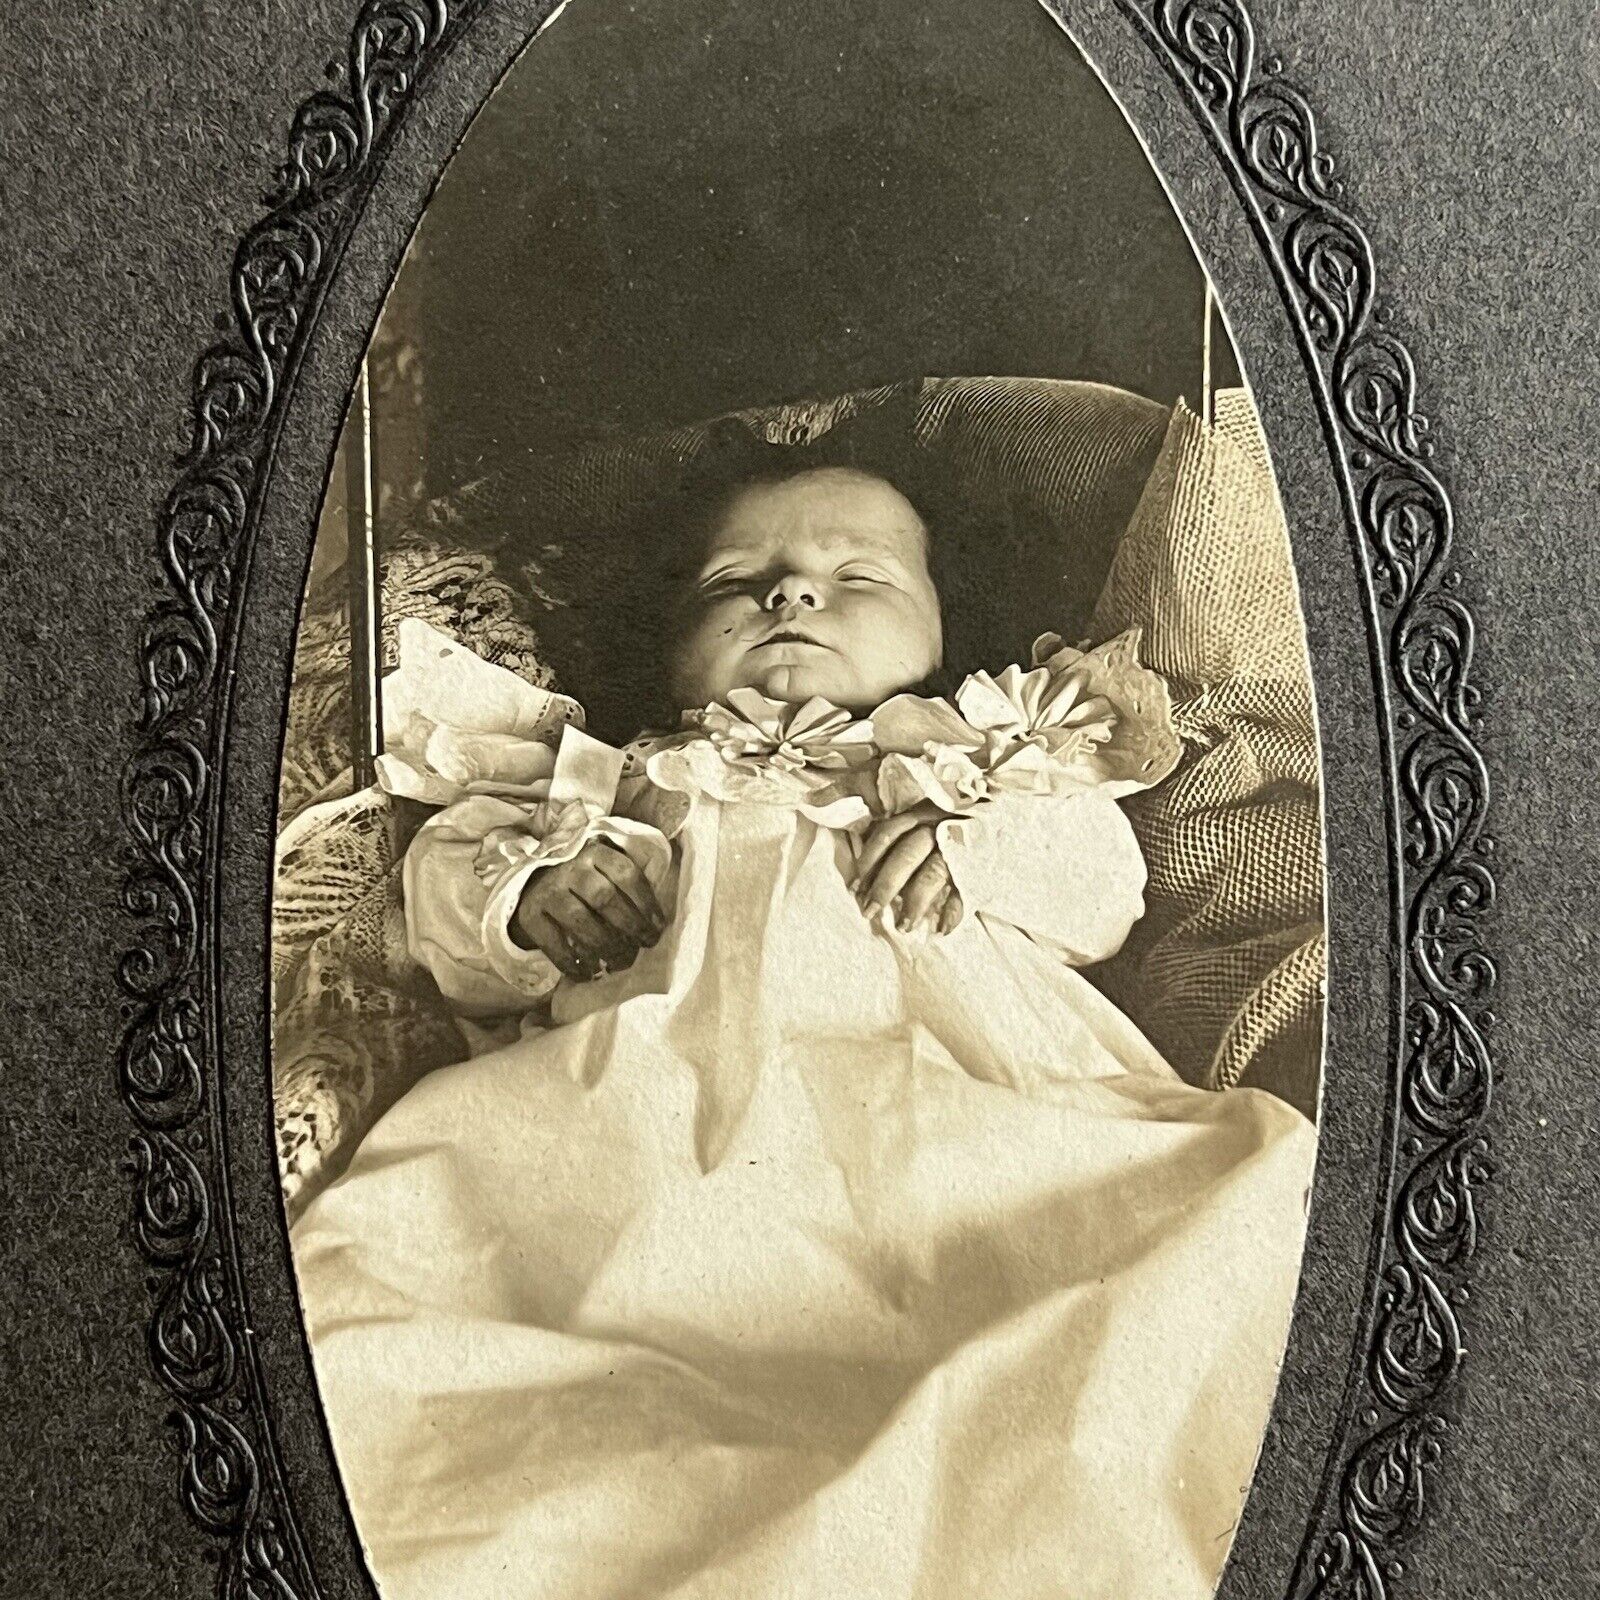 Antique Cabinet Card Photograph Post Mortem Baby Aunt Mary’s Odd